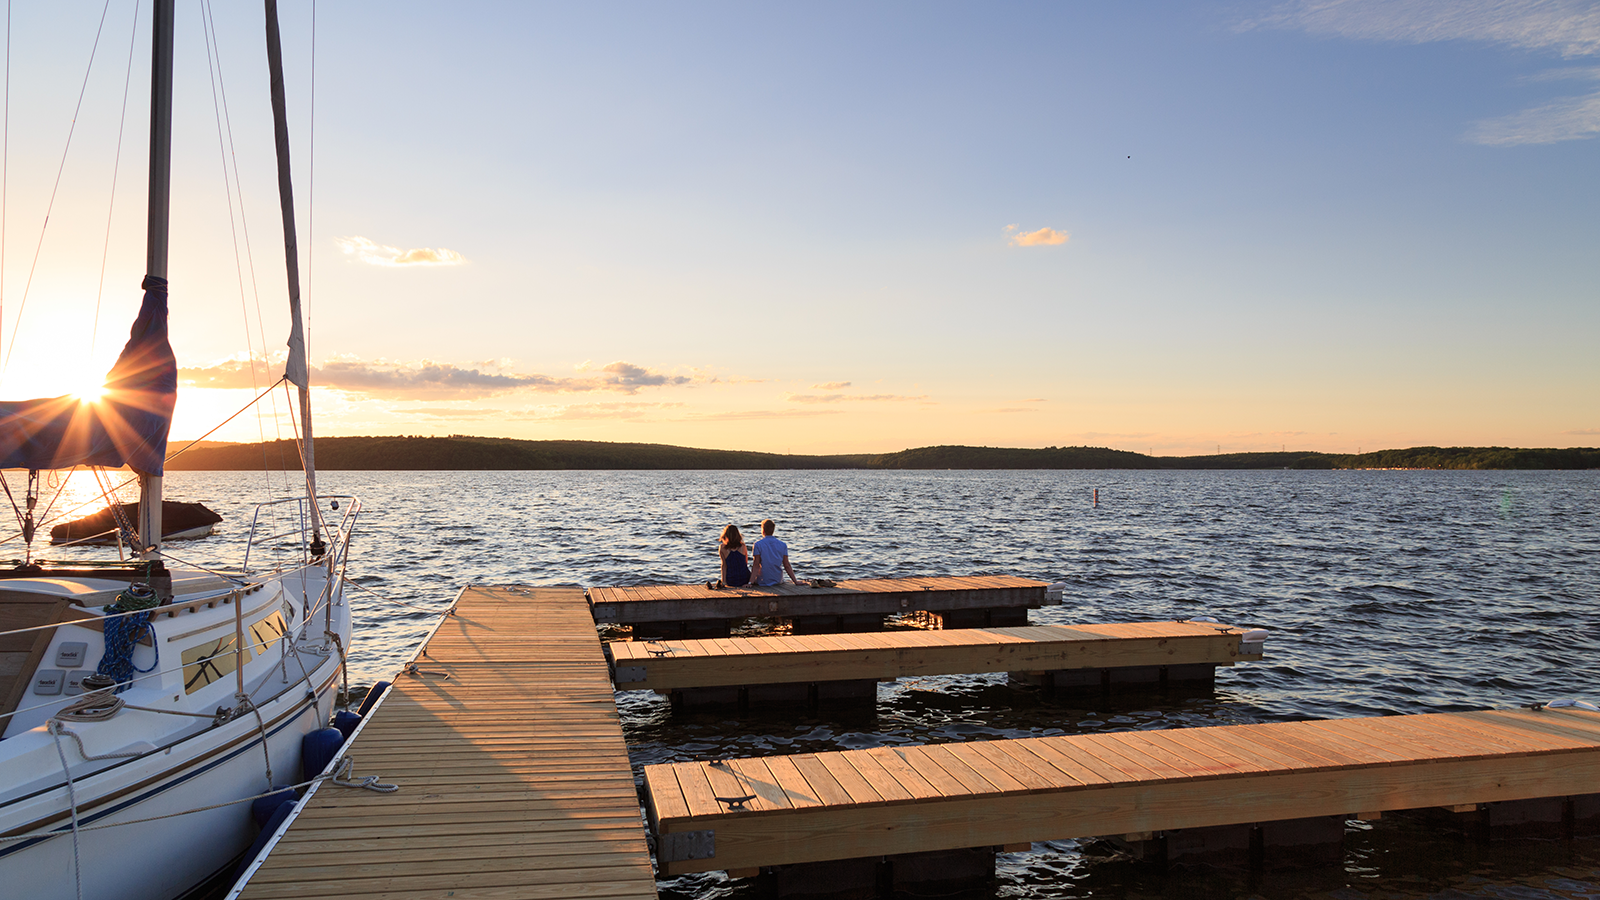 Take a day to explore the shores of Lake Wallenpaupack in Pennsylvania’s Pocono Mountains and discover the Dorflinger Glass Museum nearby.